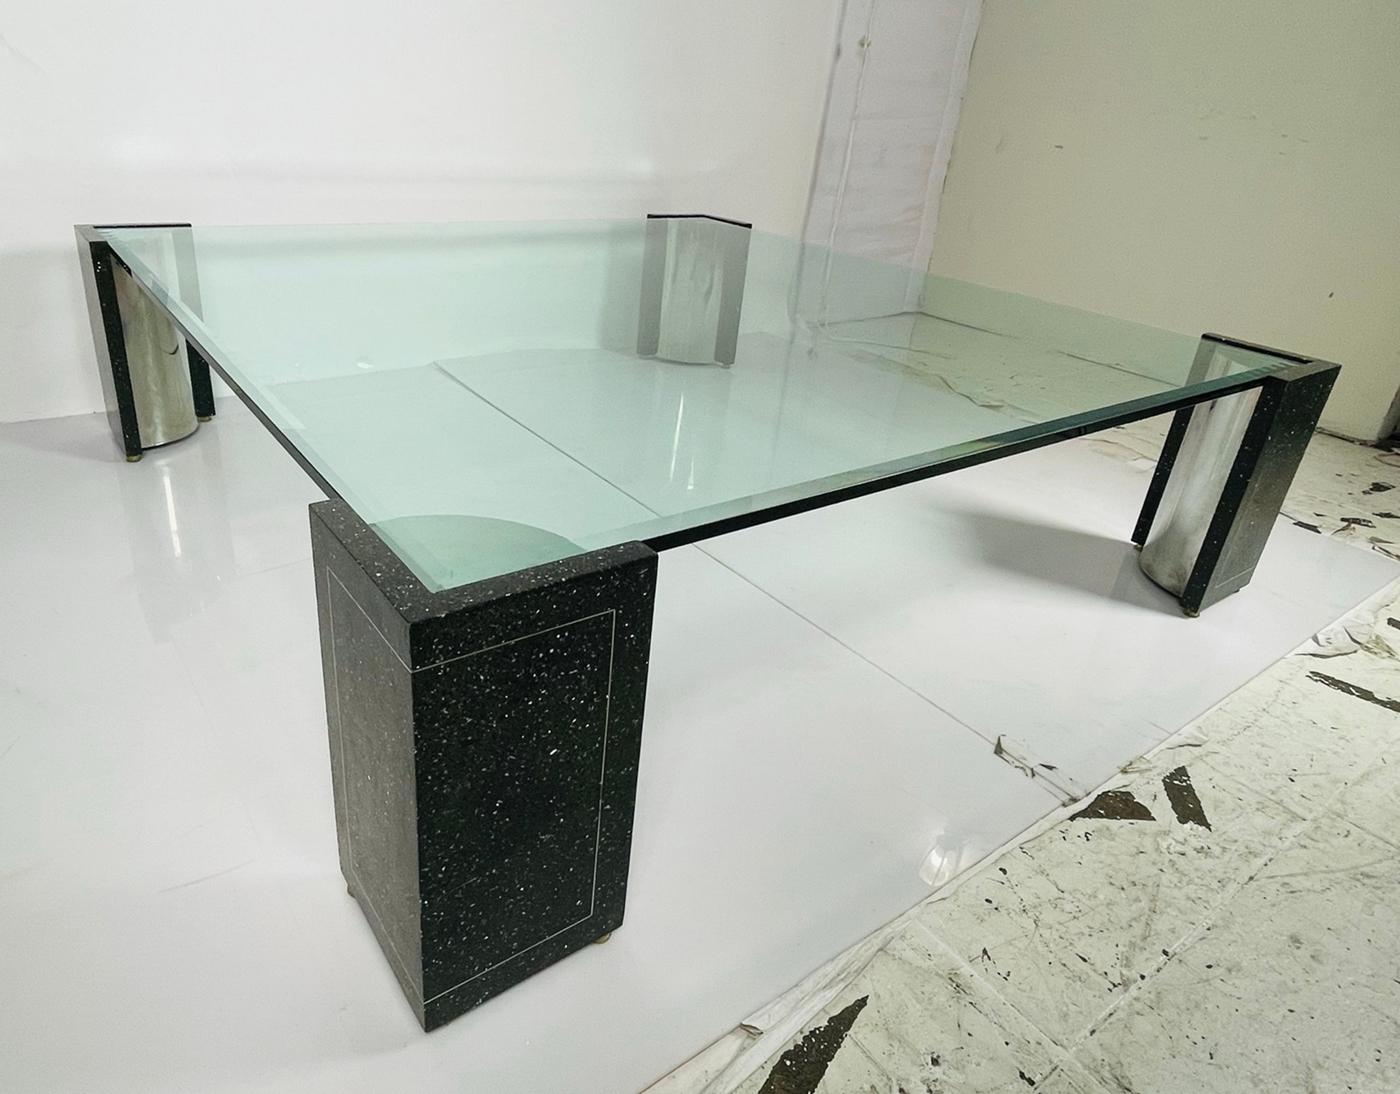 Late 20th Century Terrazzo, Stainless Steel & Glass Coffee Table After Karl Springer, USA, 1970s For Sale